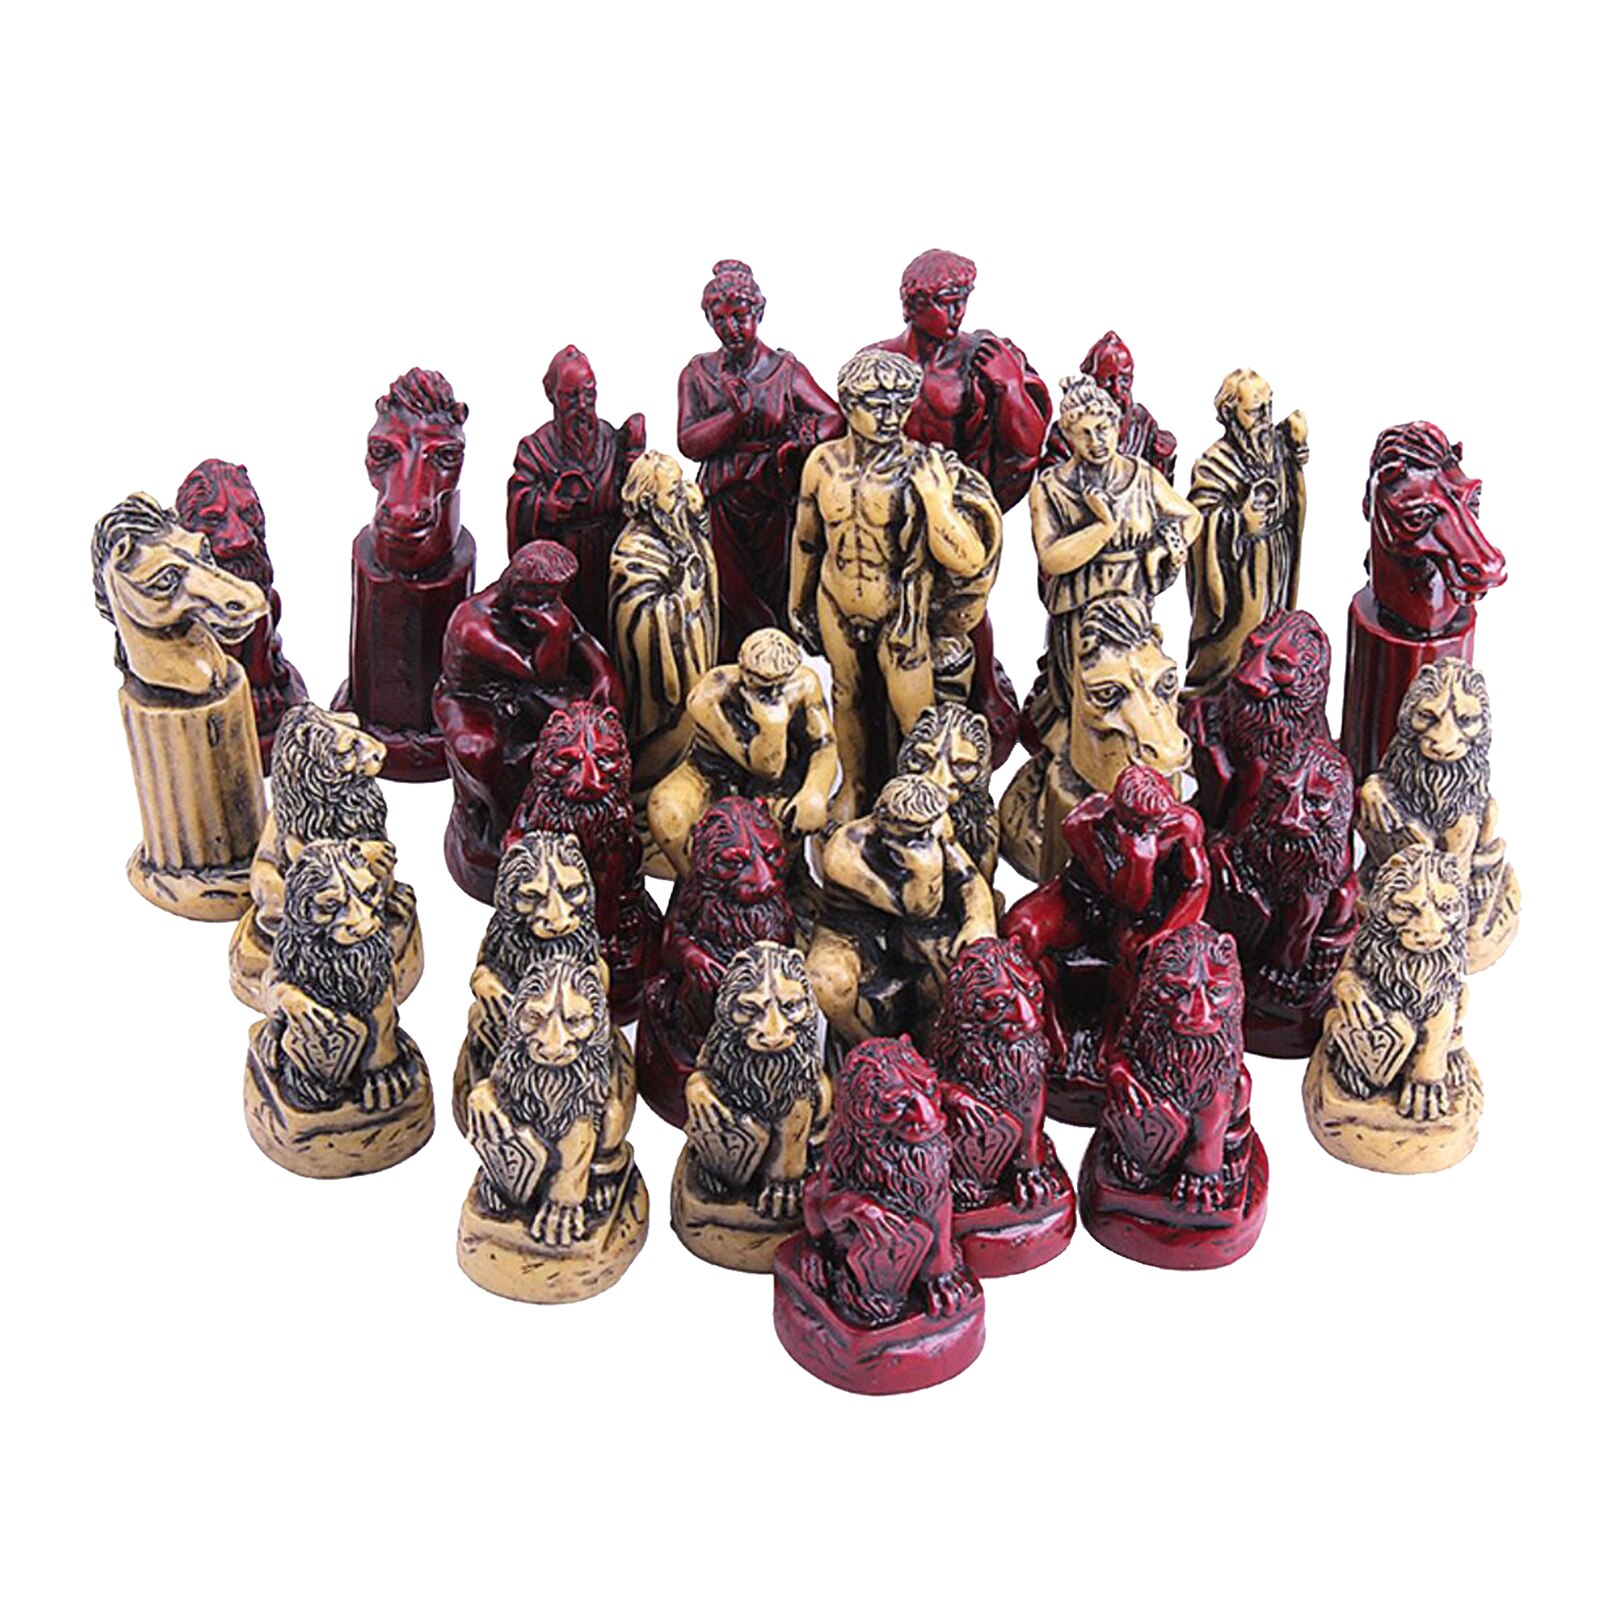 32x Resin Chess Pieces Portable Antique Roman Chess Set for Travel Party Game